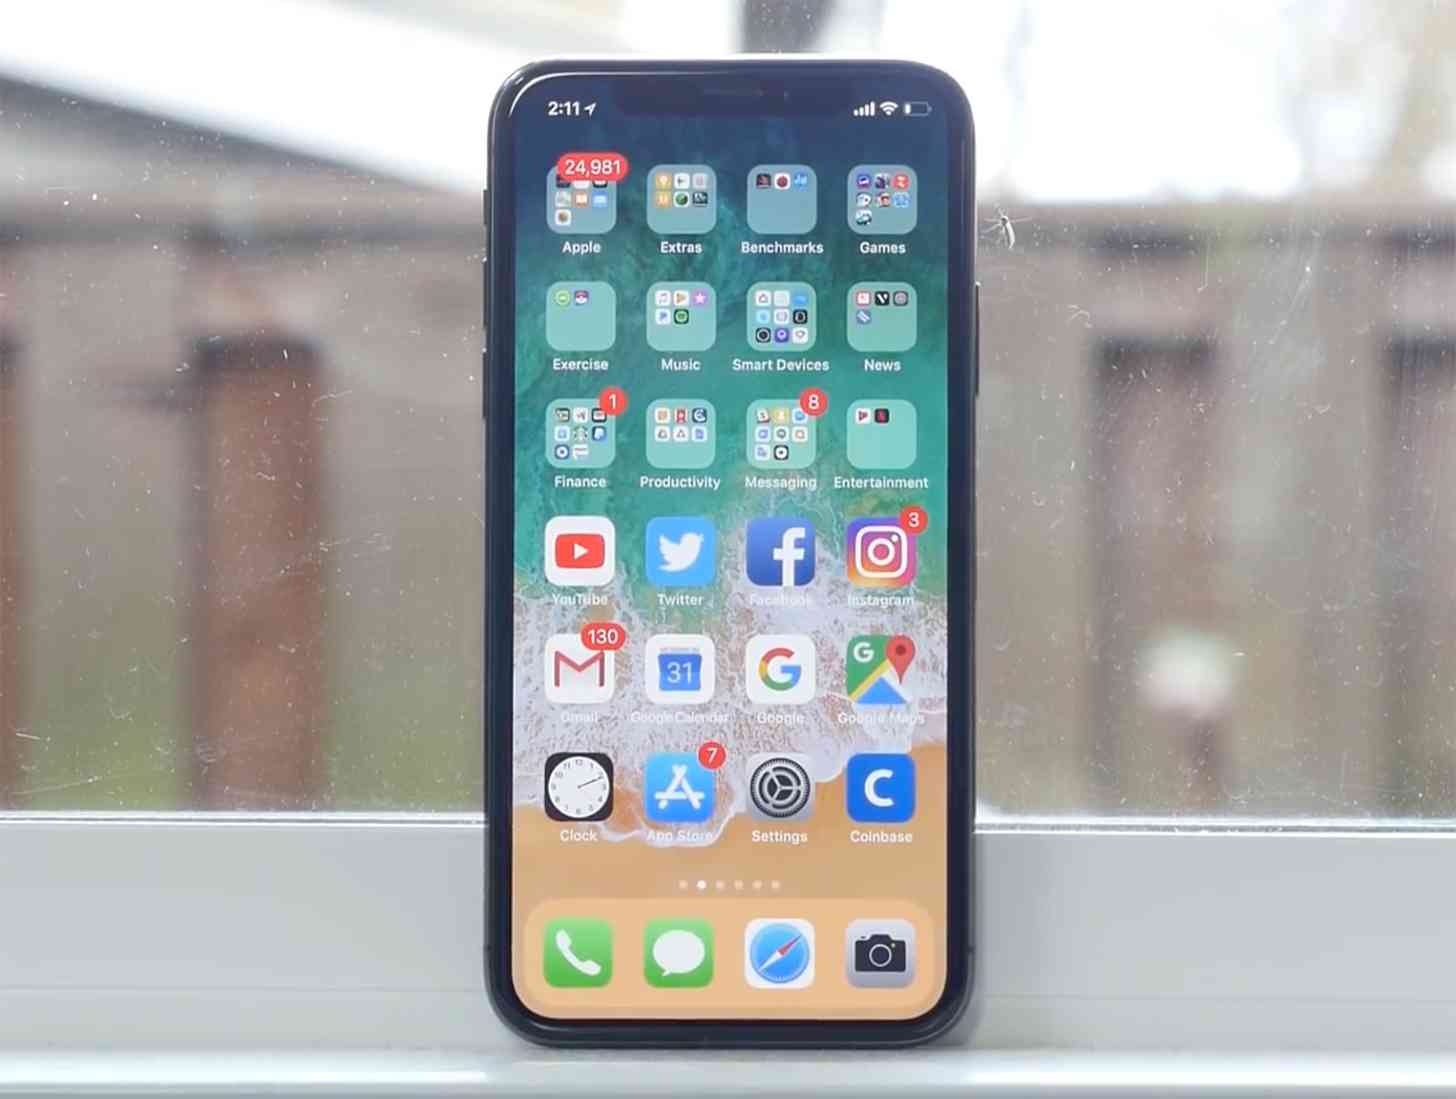 iPhone X hands-on video